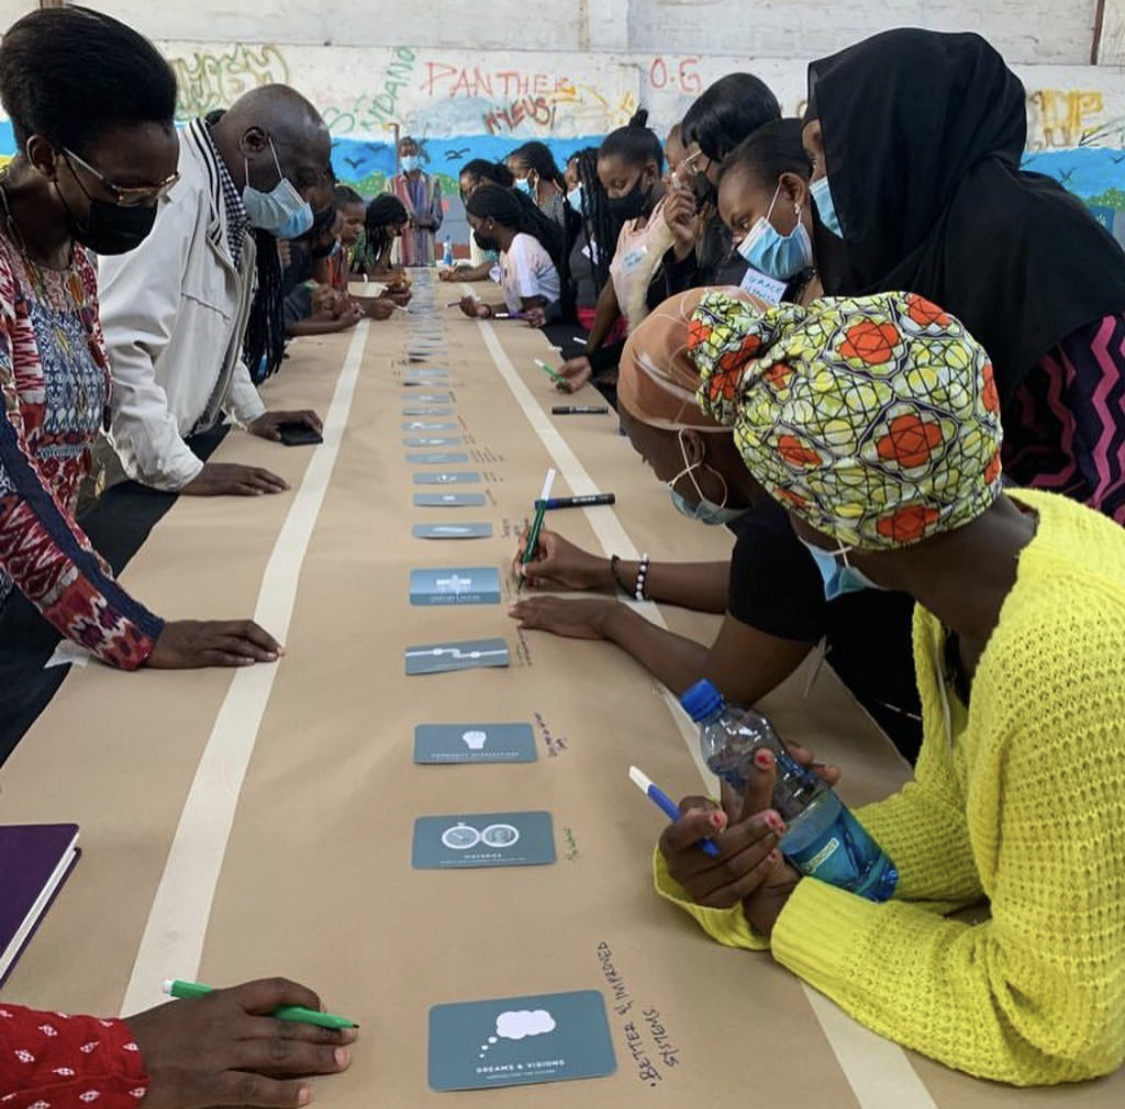 We 💙 our workshop participants! When communities come together to imagine something better, it's a beautiful thing.😍 Thanks for capturing the magic, @hercitytoolbox. #citiesforpeople #hercity @godownarts @UNHabitat @globalutmaning